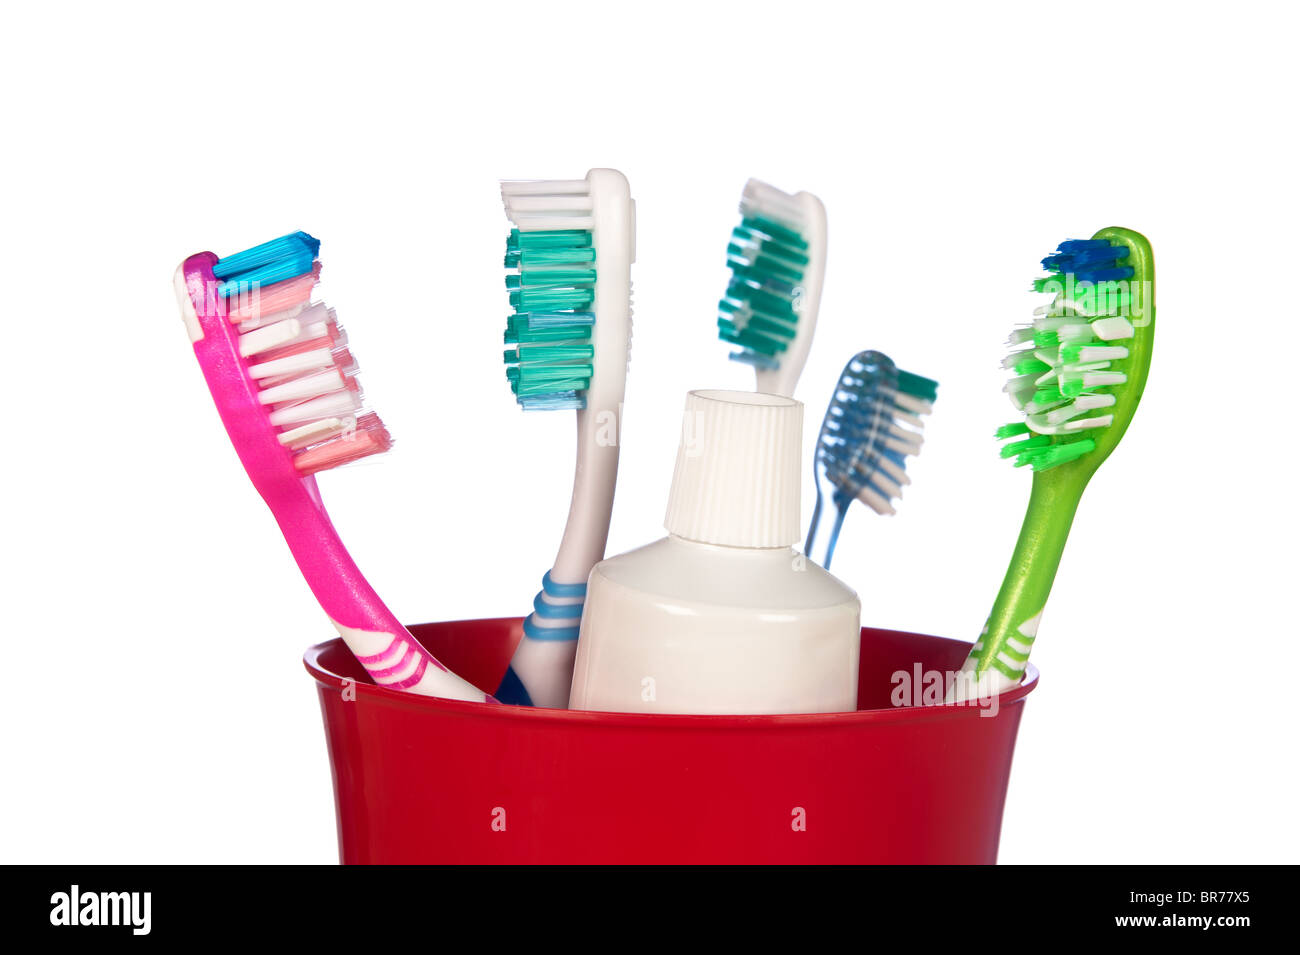 Toothbrushes and a tube of toothpaste in a cup isolated on white. Stock Photo